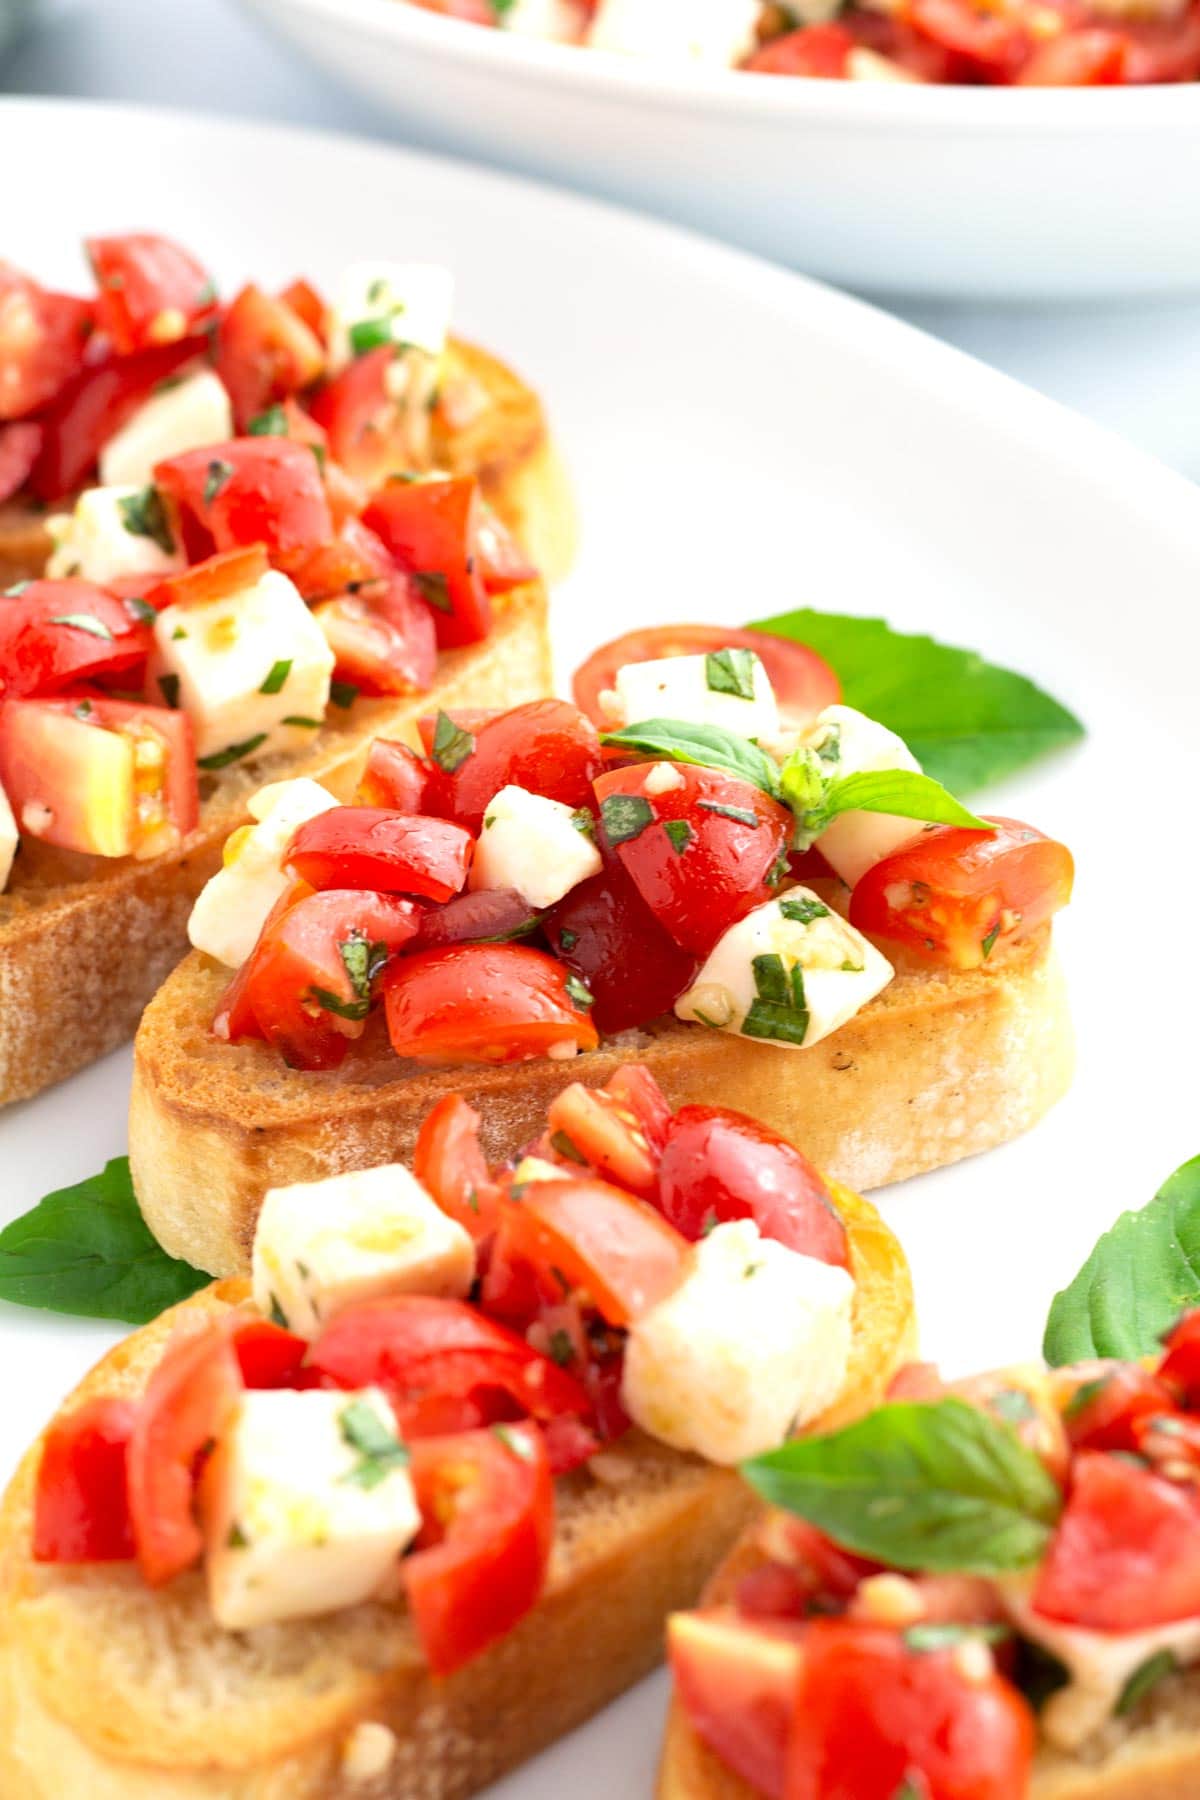 Five slices of bruschetta with mozzarella on a white tray with a serving bowl on the edge of the scene.